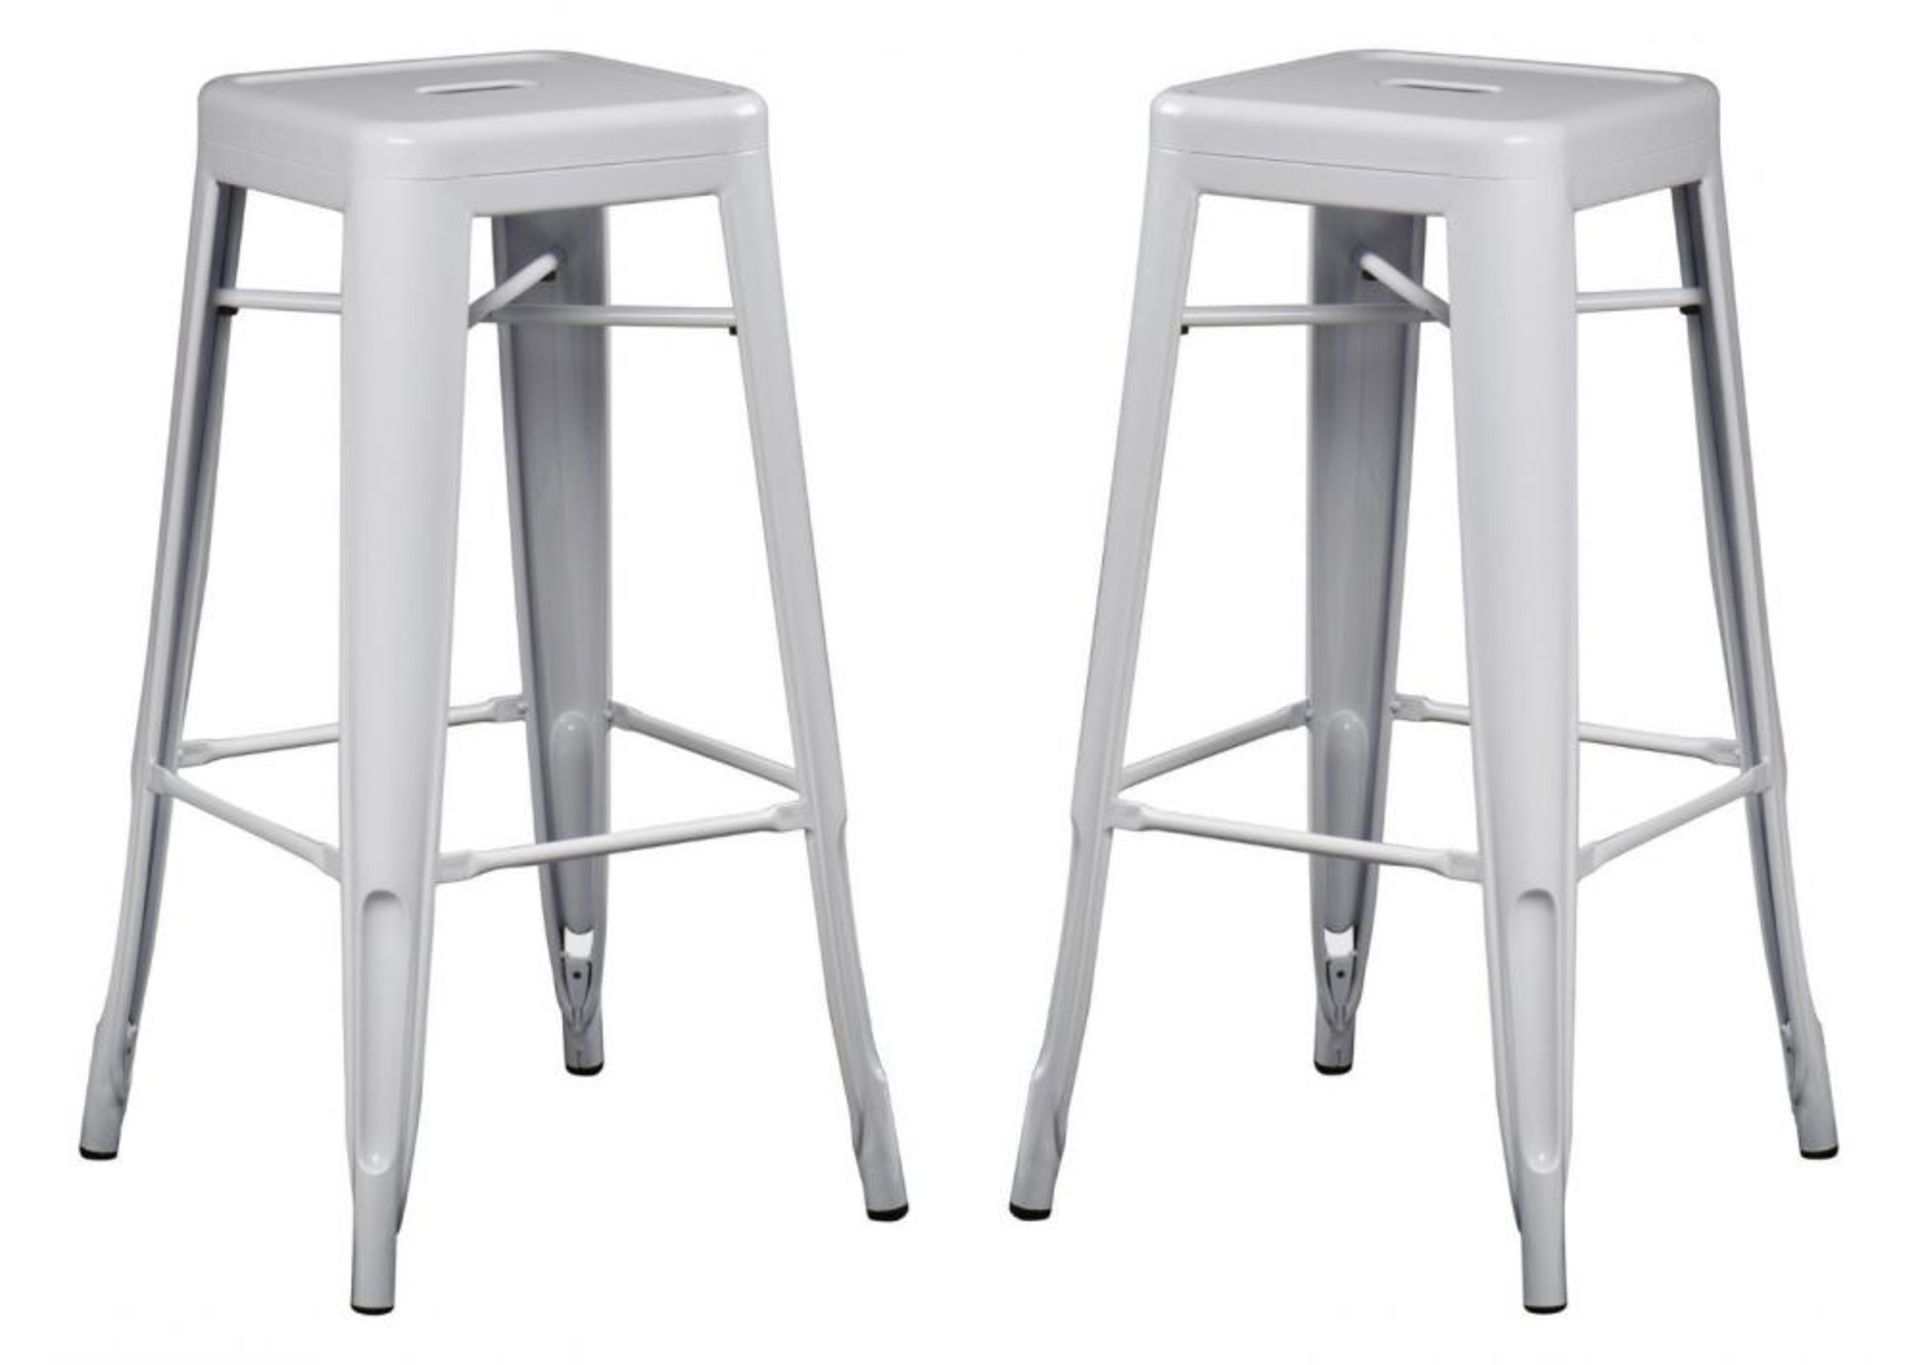 2 x Xavier Pauchard / Tolix Inspired Industrial WHITE Bar Stools - Pair of - Lightweight and Stackab